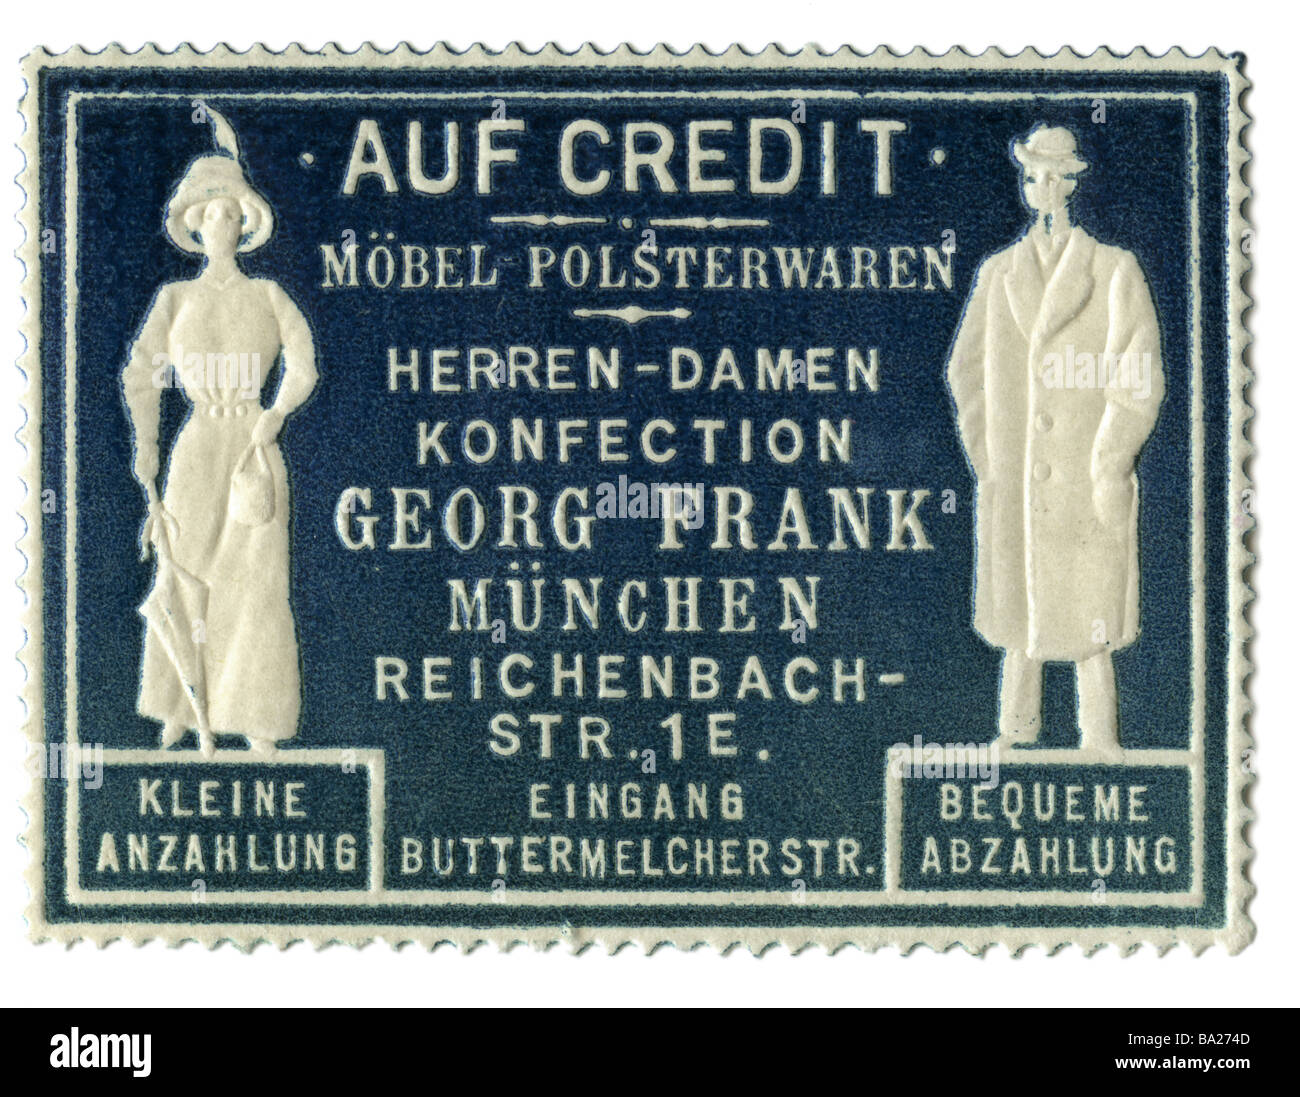 advertising, stamps, furniture and upholsteries, Georg Frank, Munich, Germany, circa 1910, historic, historical, trade, collecting stamp, clipping, advertisment, 20th century, 1910s, Reichenbachstrasse 1, clothes, ready-made, clothing, people, Stock Photo